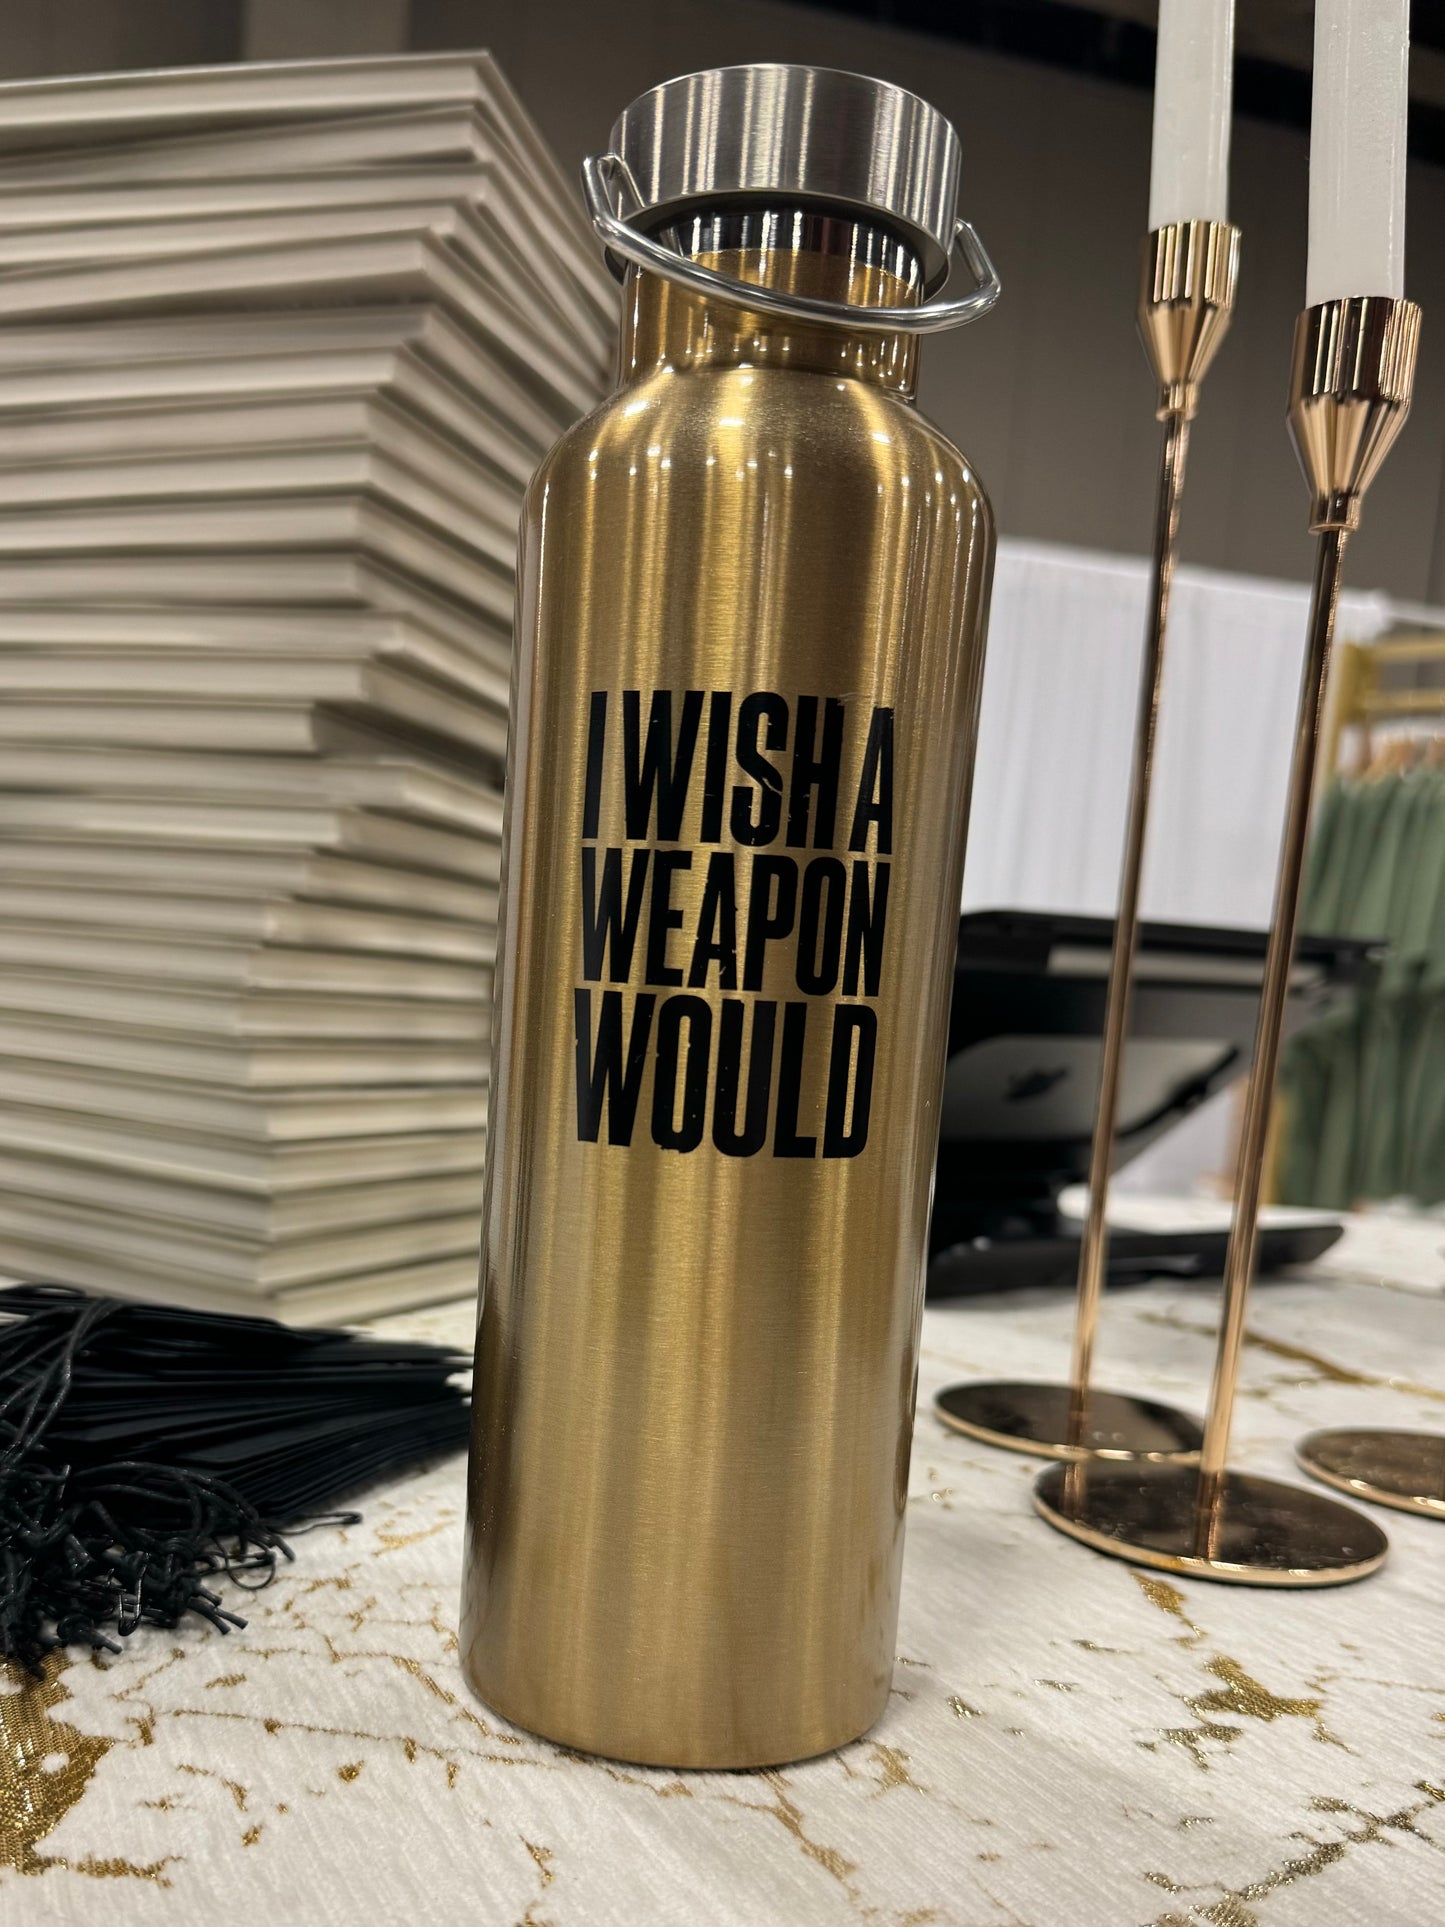 "I Wish A Weapon Would" Water Bottle